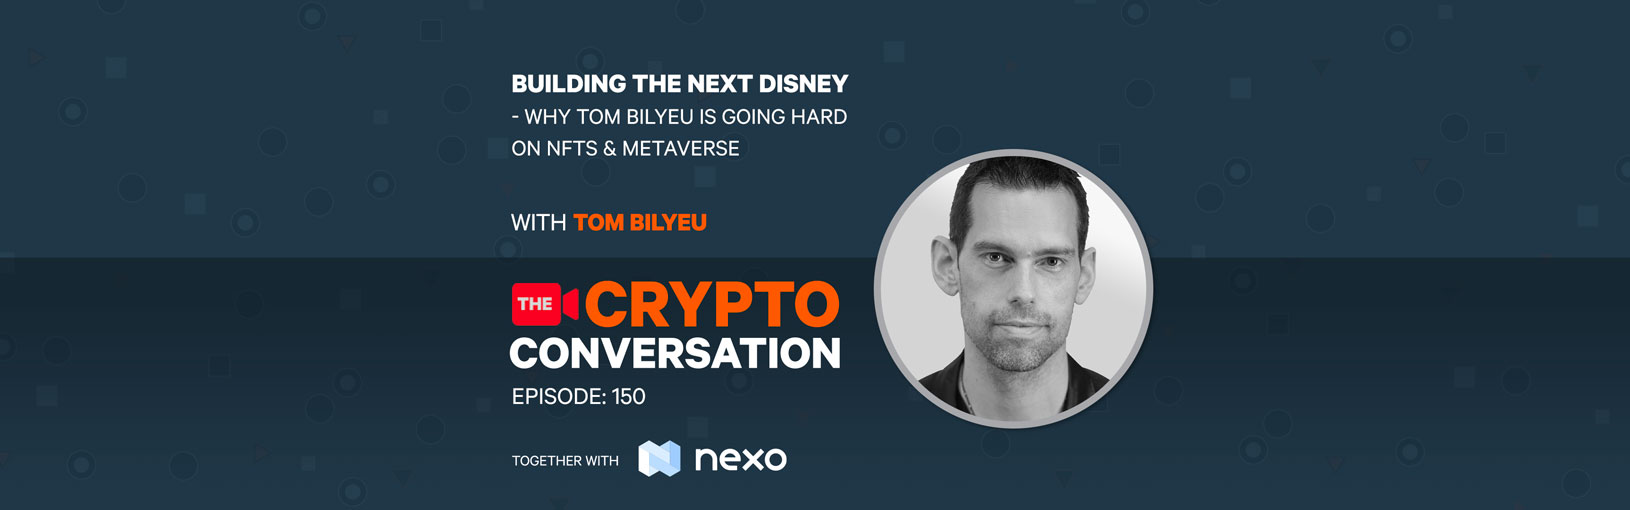 Building the next Disney – Why Tom Bilyeu is going HARD on NFTs & the Metaverse